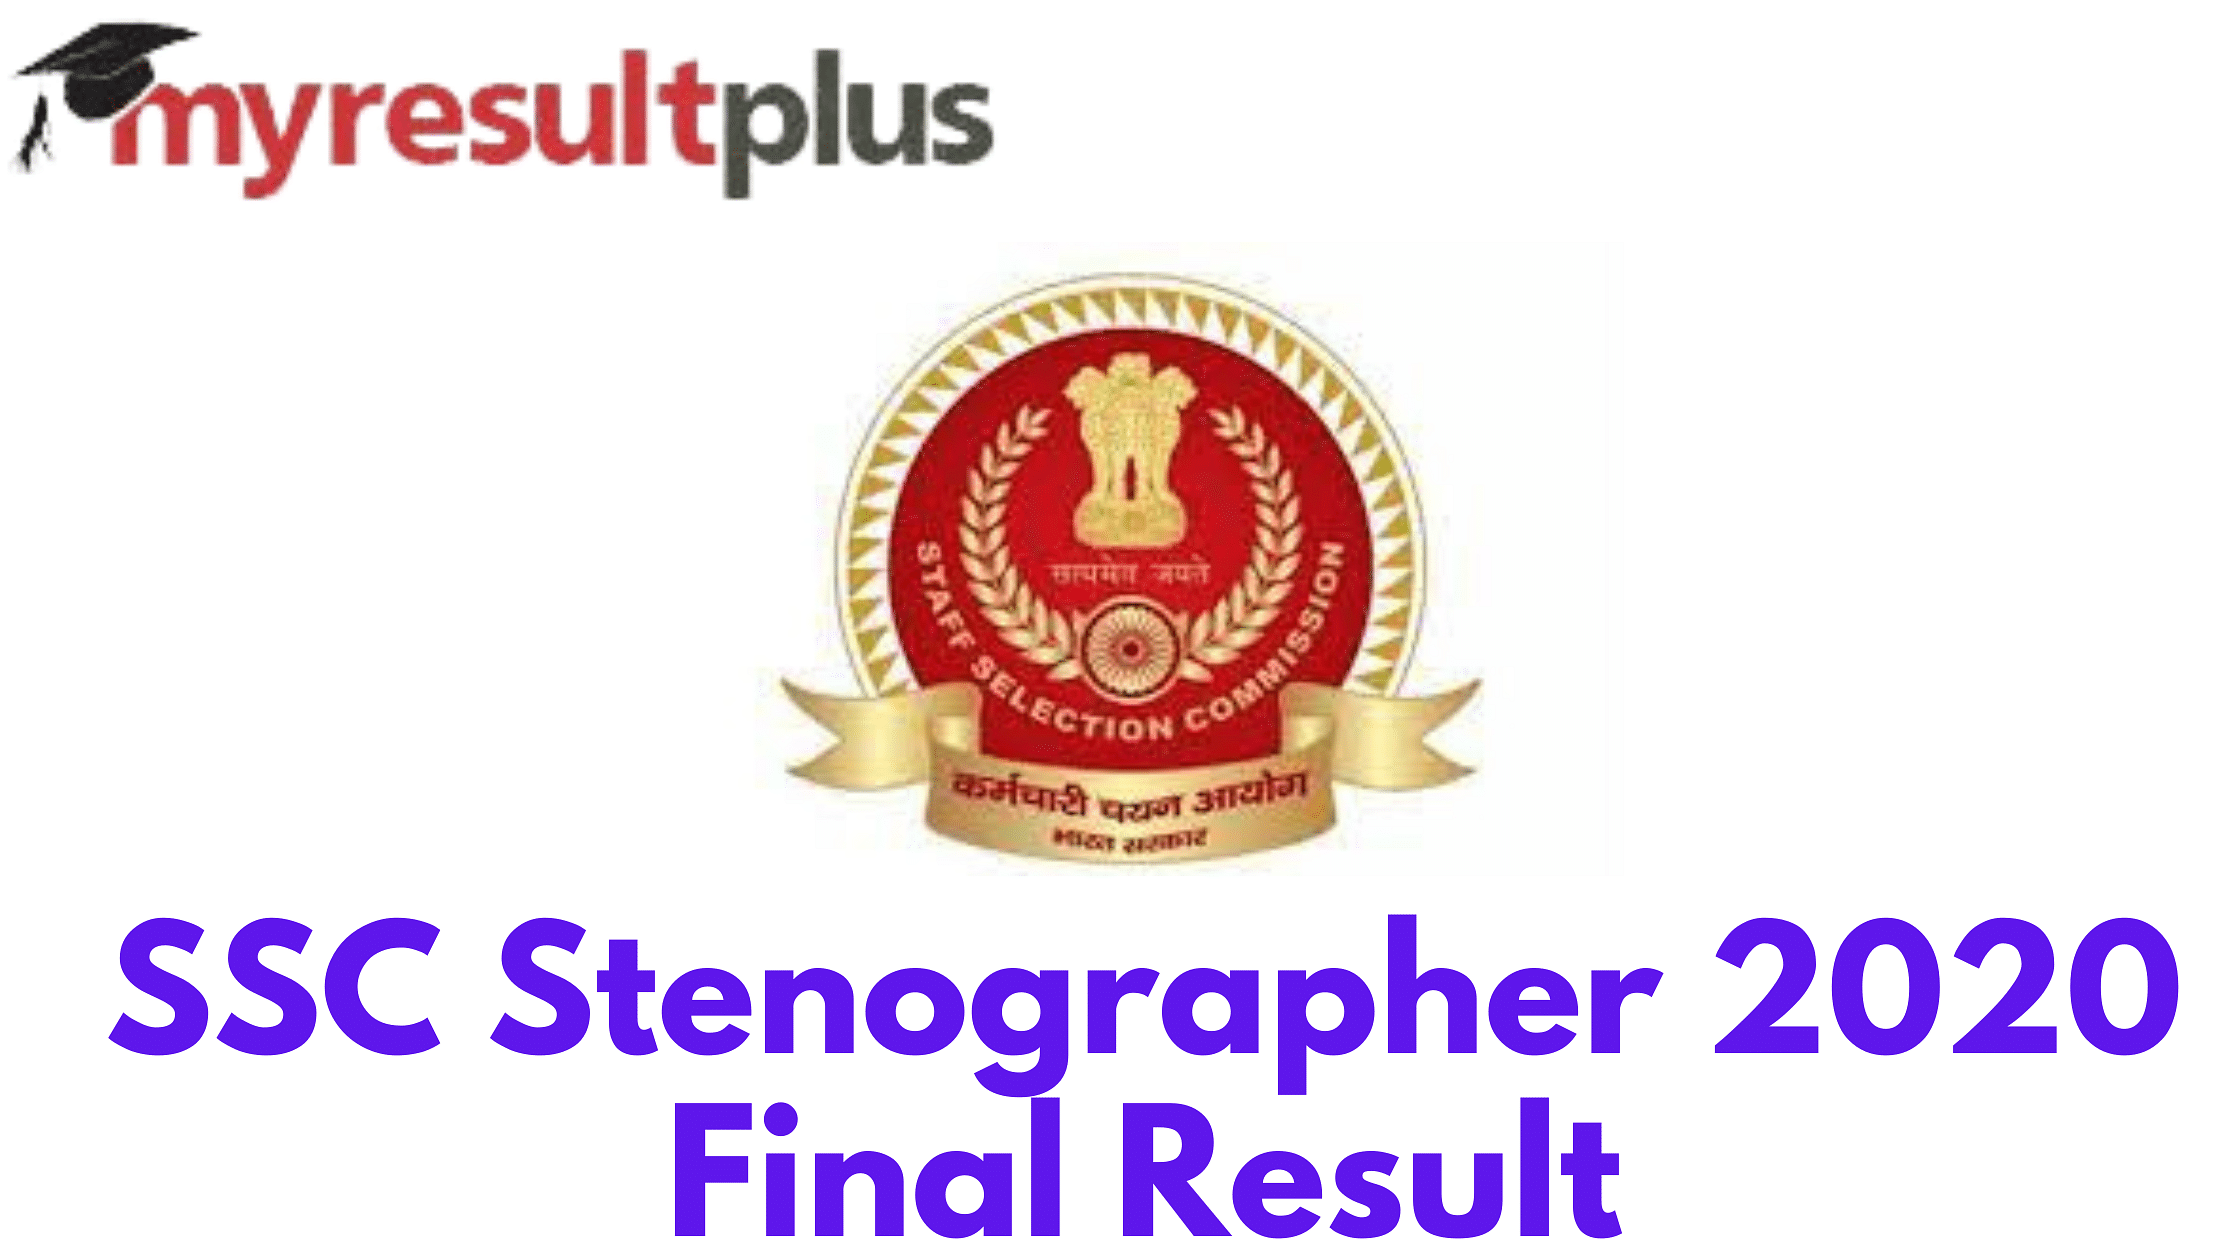 SSC Stenographer 2020 Final Result Out, Here's Direct Link to Check